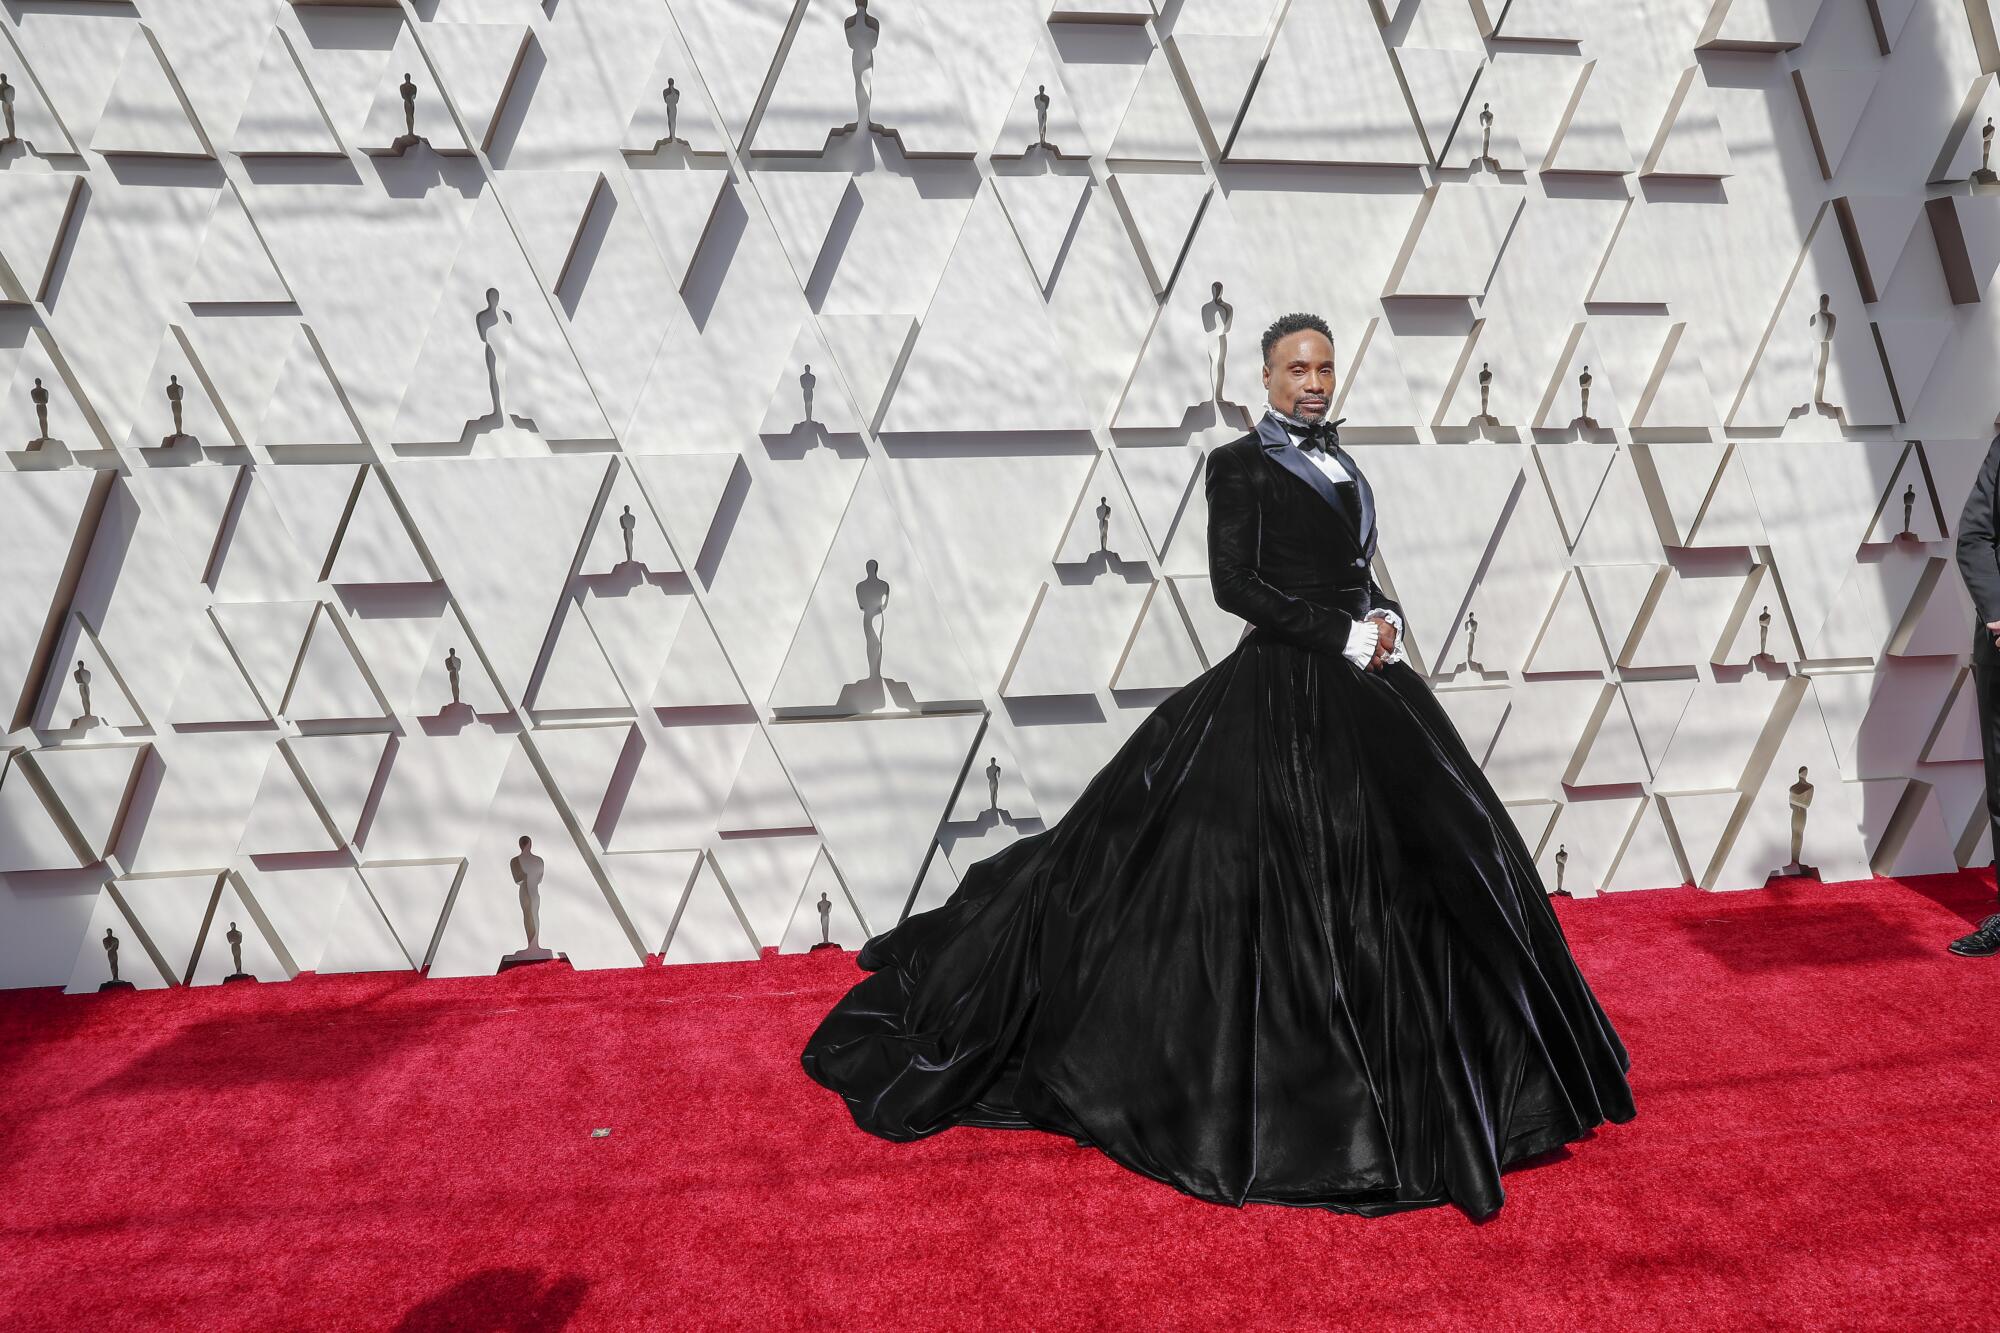 Billy Porter on the red carpet at the Academy Awards in 2019.